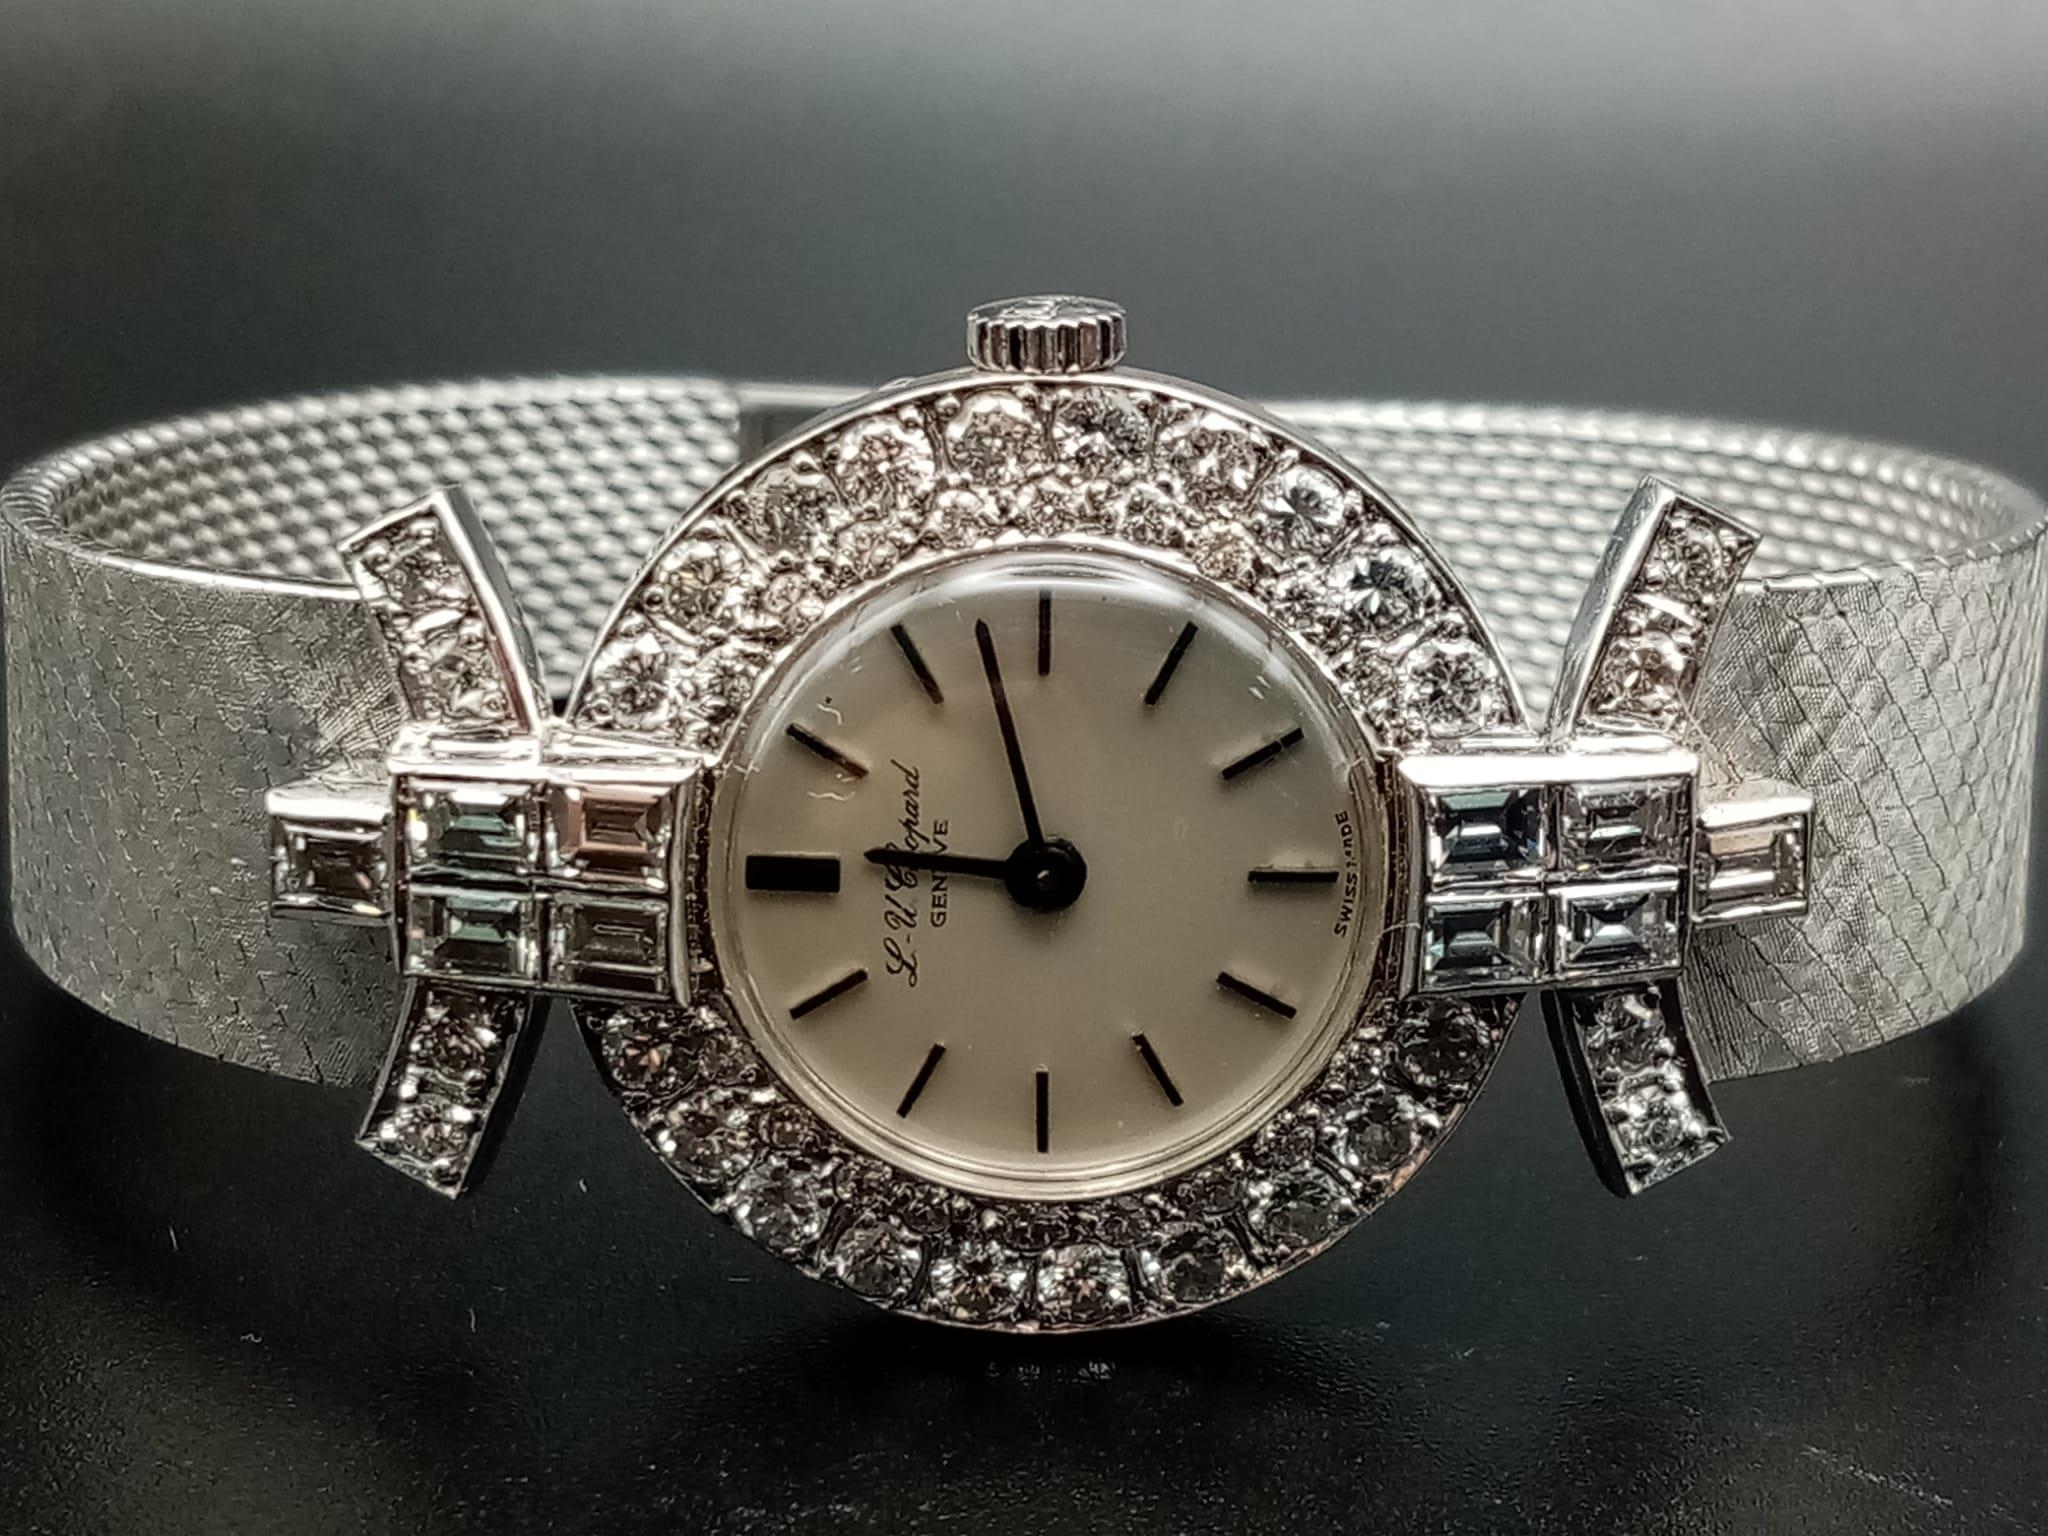 A Chopard 18K White Gold and Diamond Ladies Watch. White gold strap and case - 25mm diameter. - Image 4 of 10